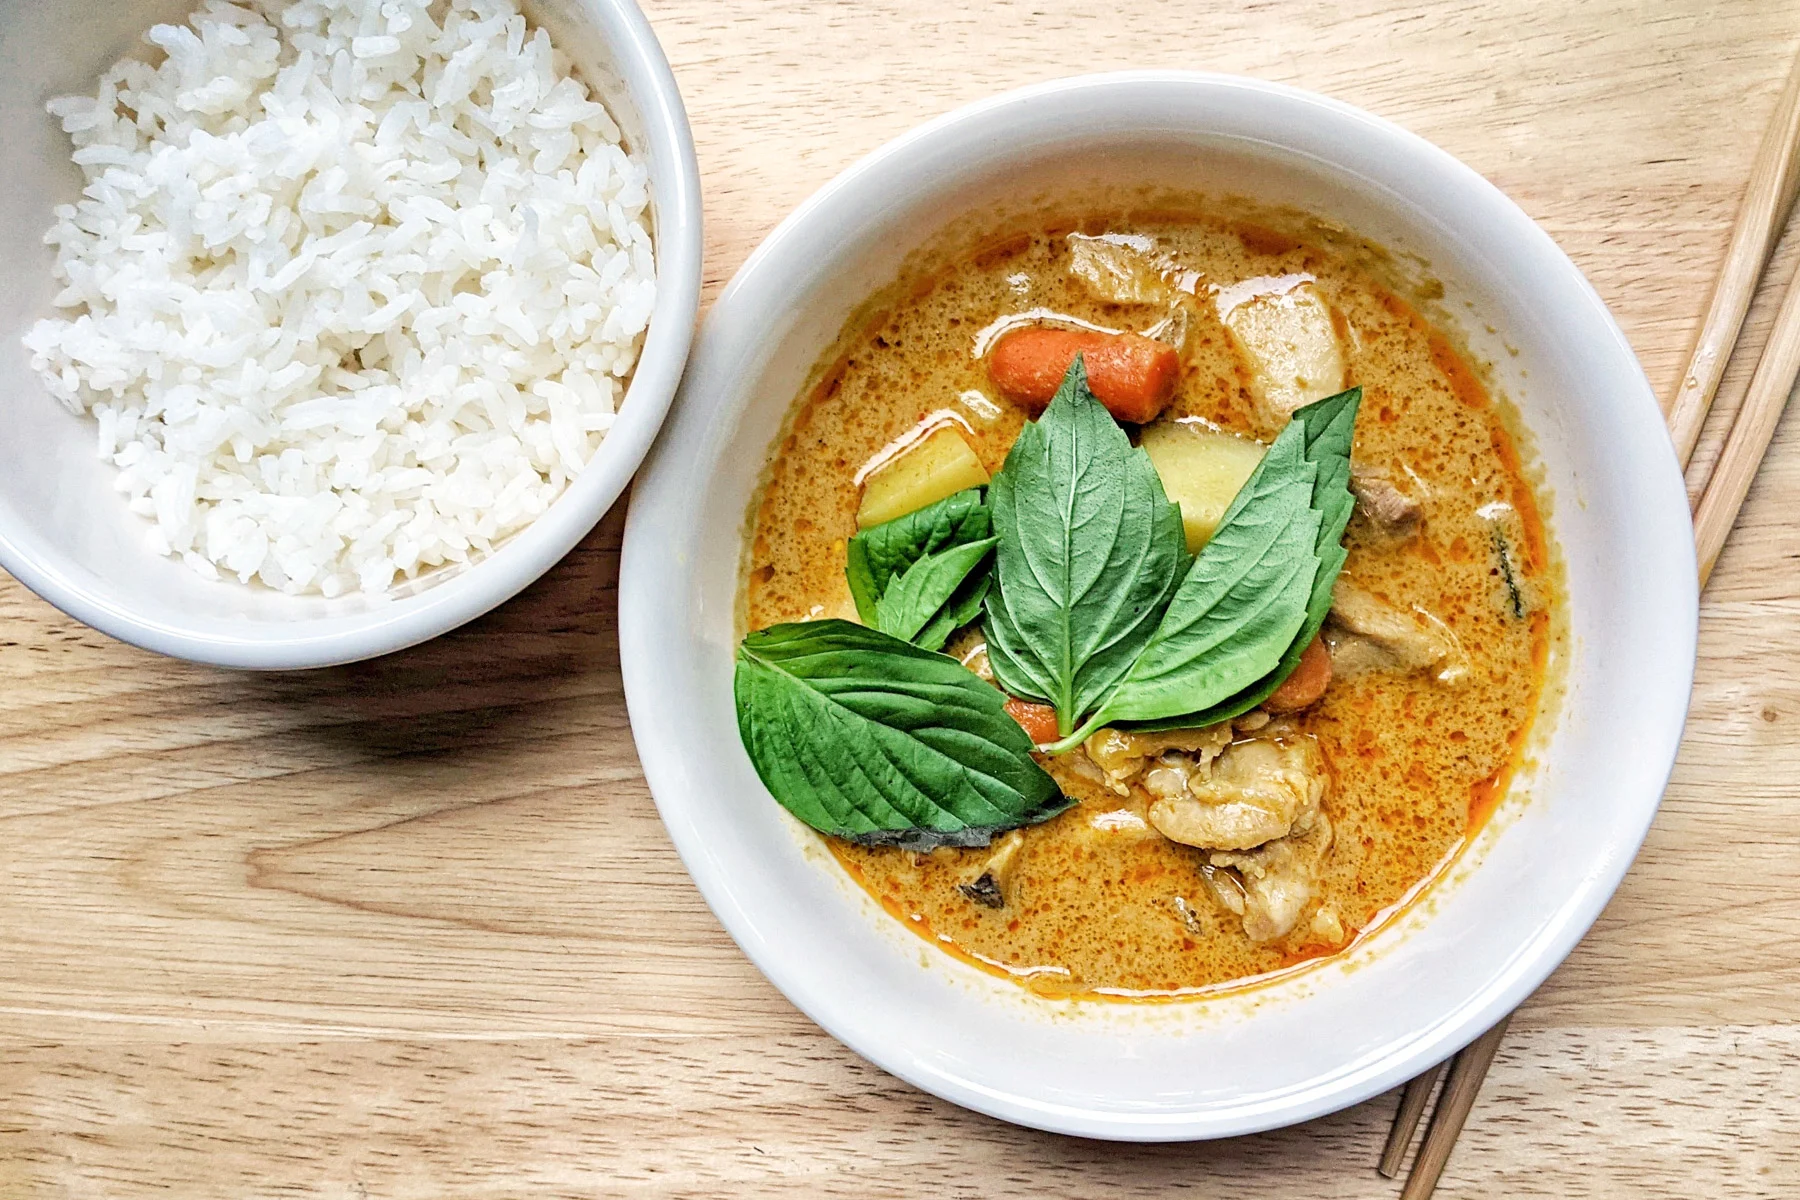 Thai Yellow Chicken Curry in a bowl.